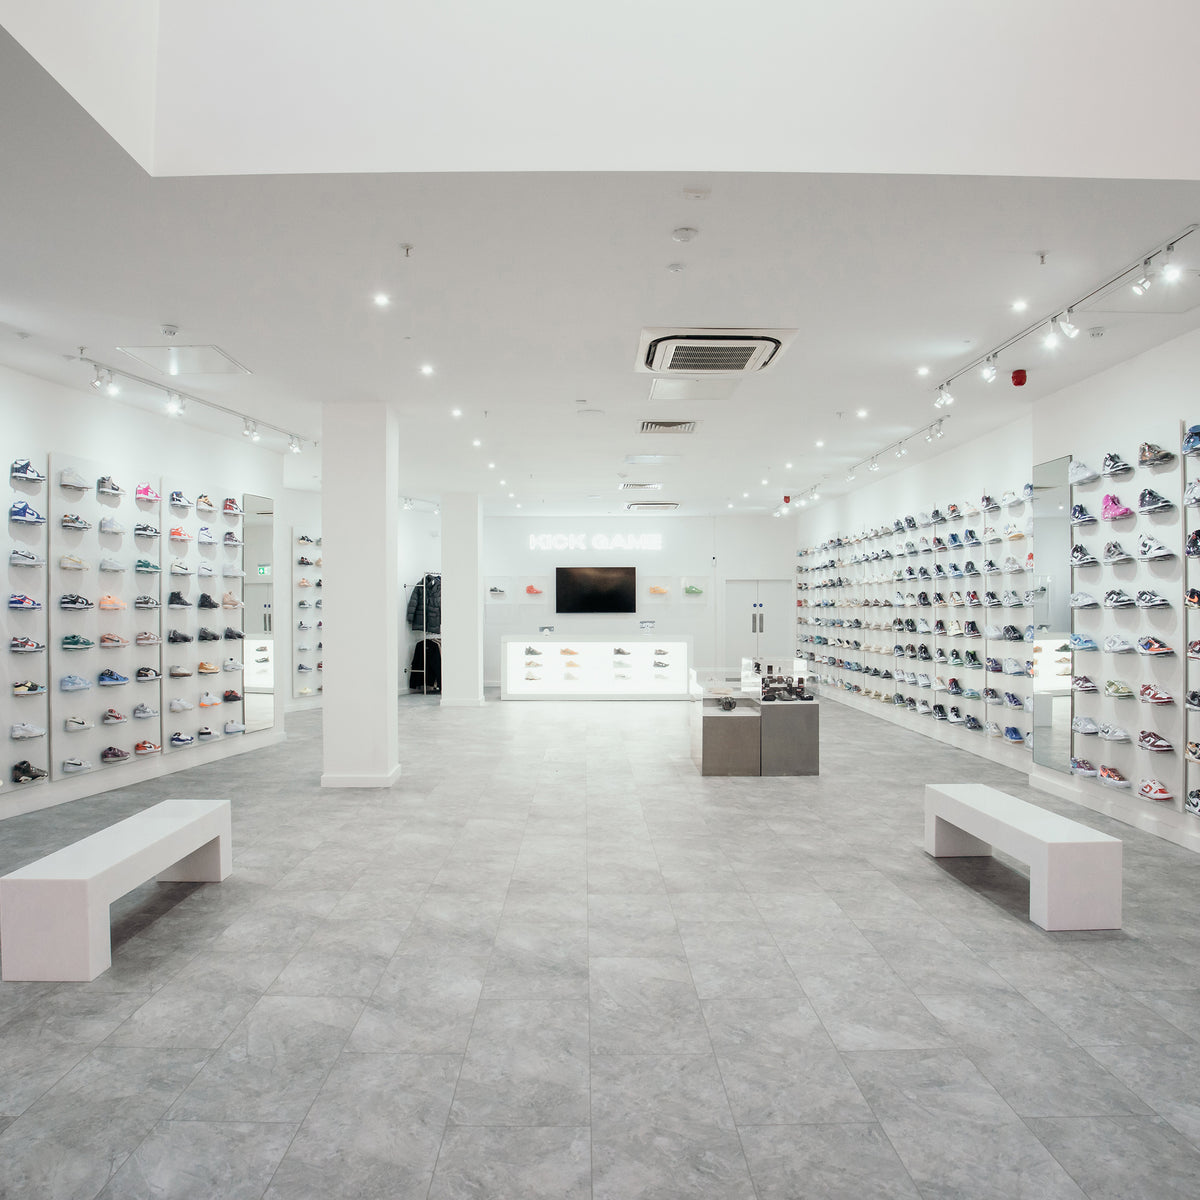 Kick Game Opens Their Doors in Newcastle